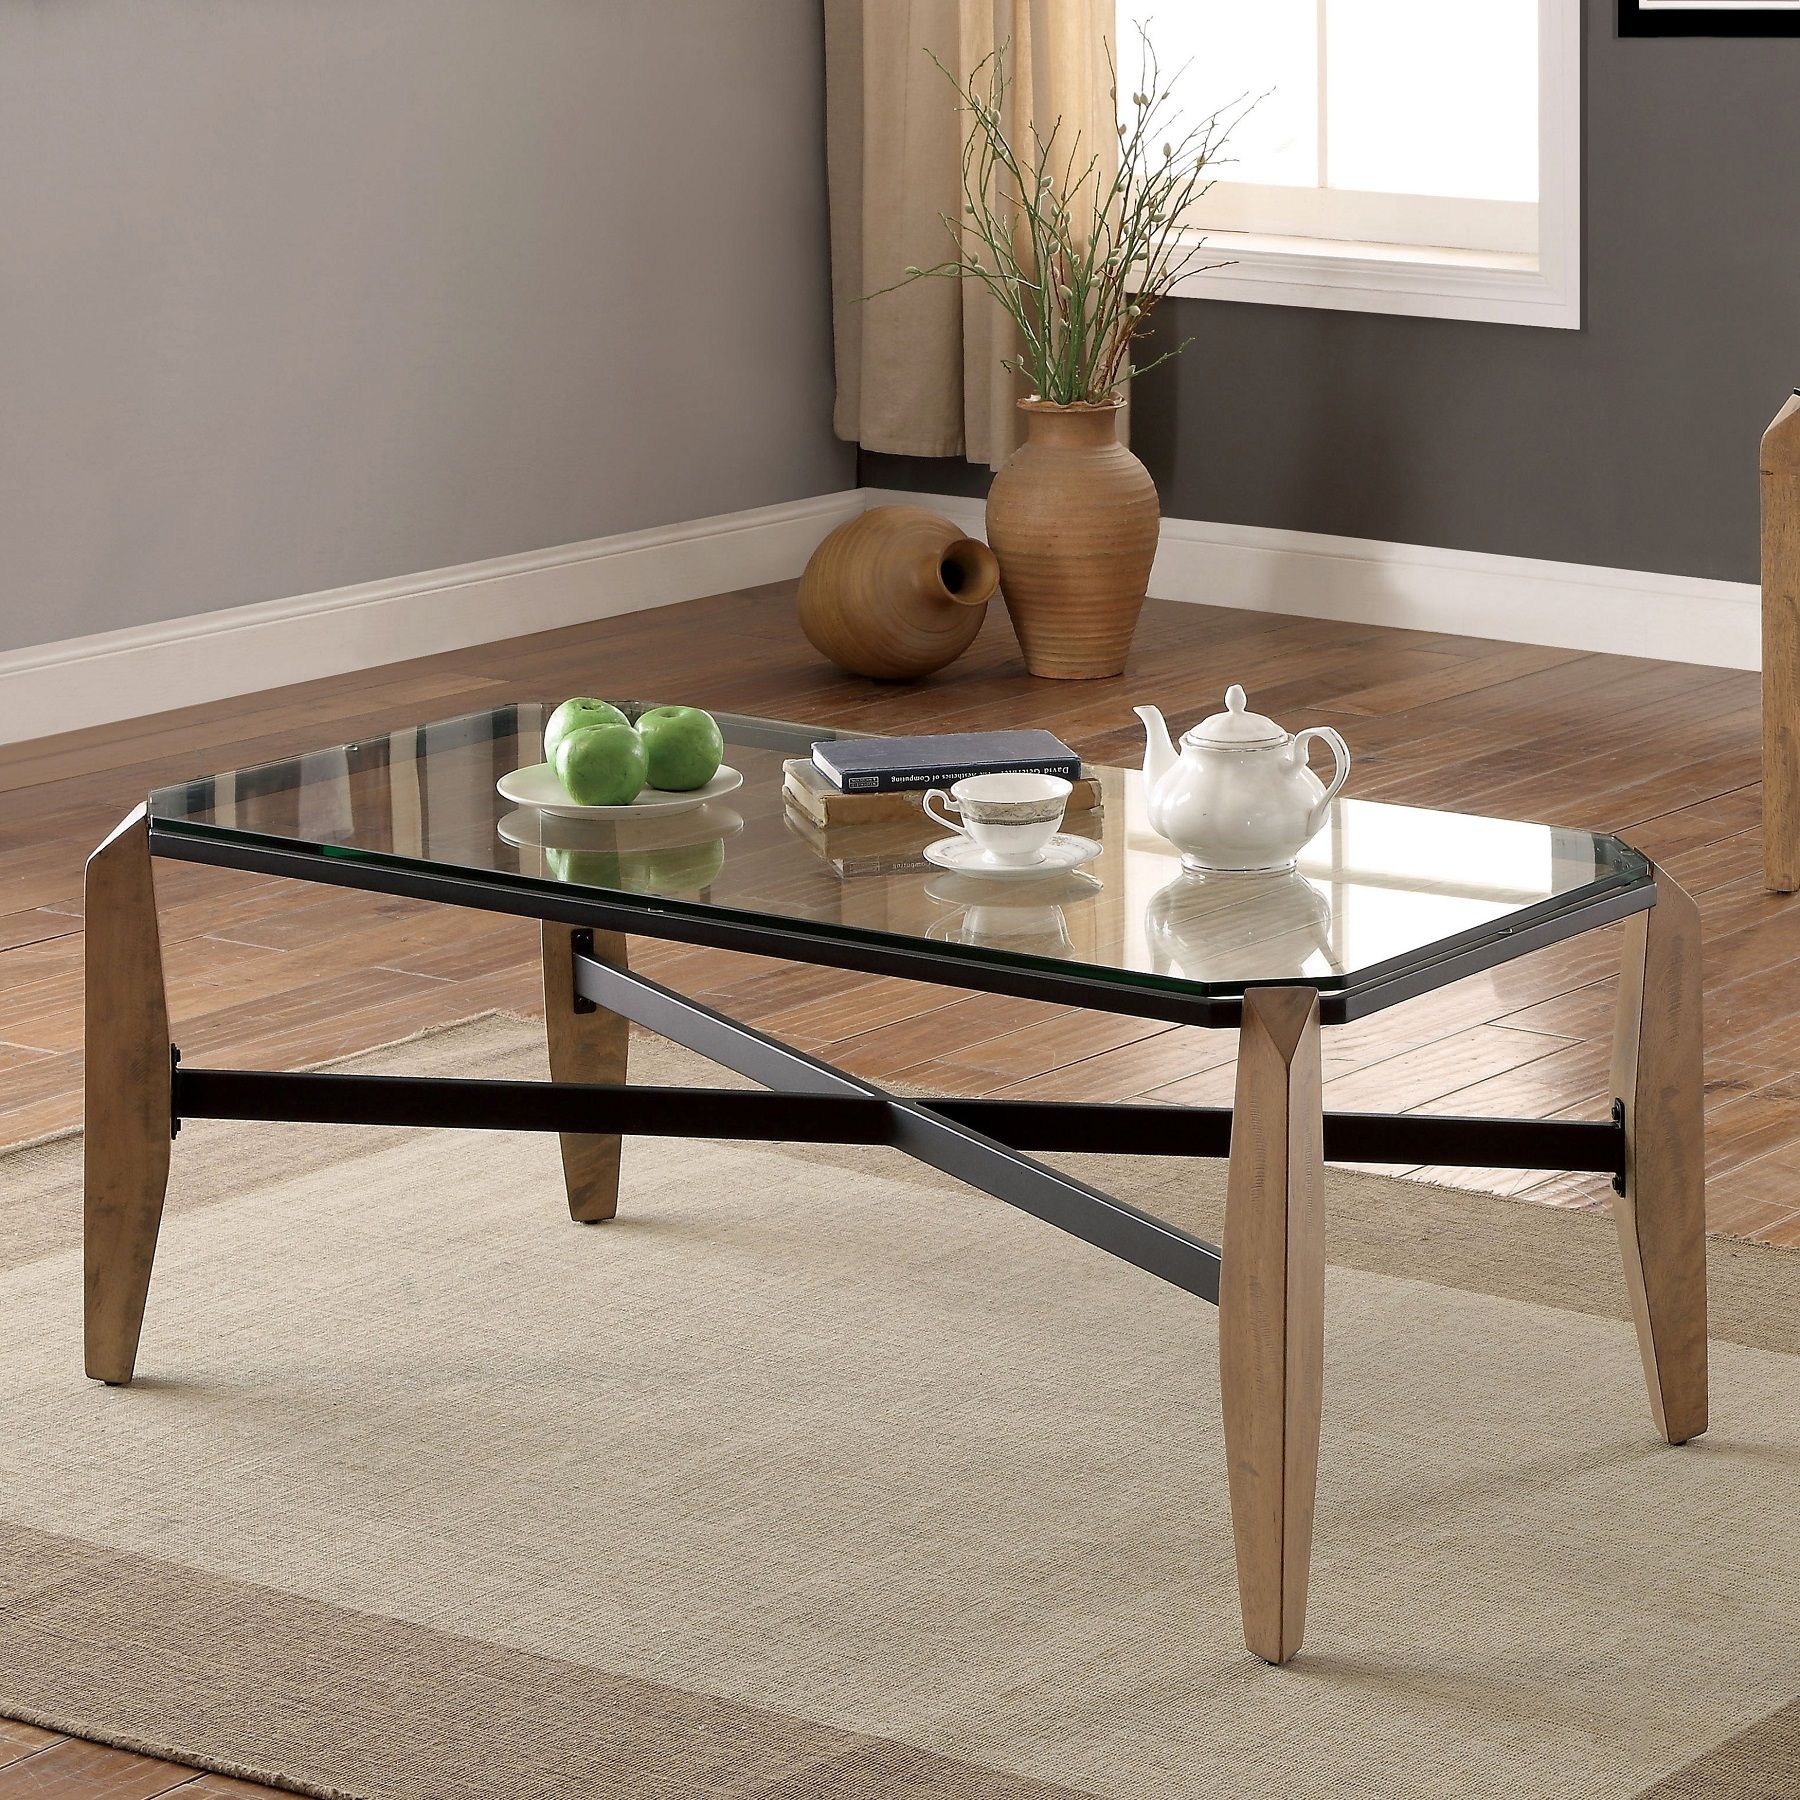 Buy Contemporary Glass Top Coffee Table Online | Teaklab Within Glass Top Coffee Tables (View 6 of 15)